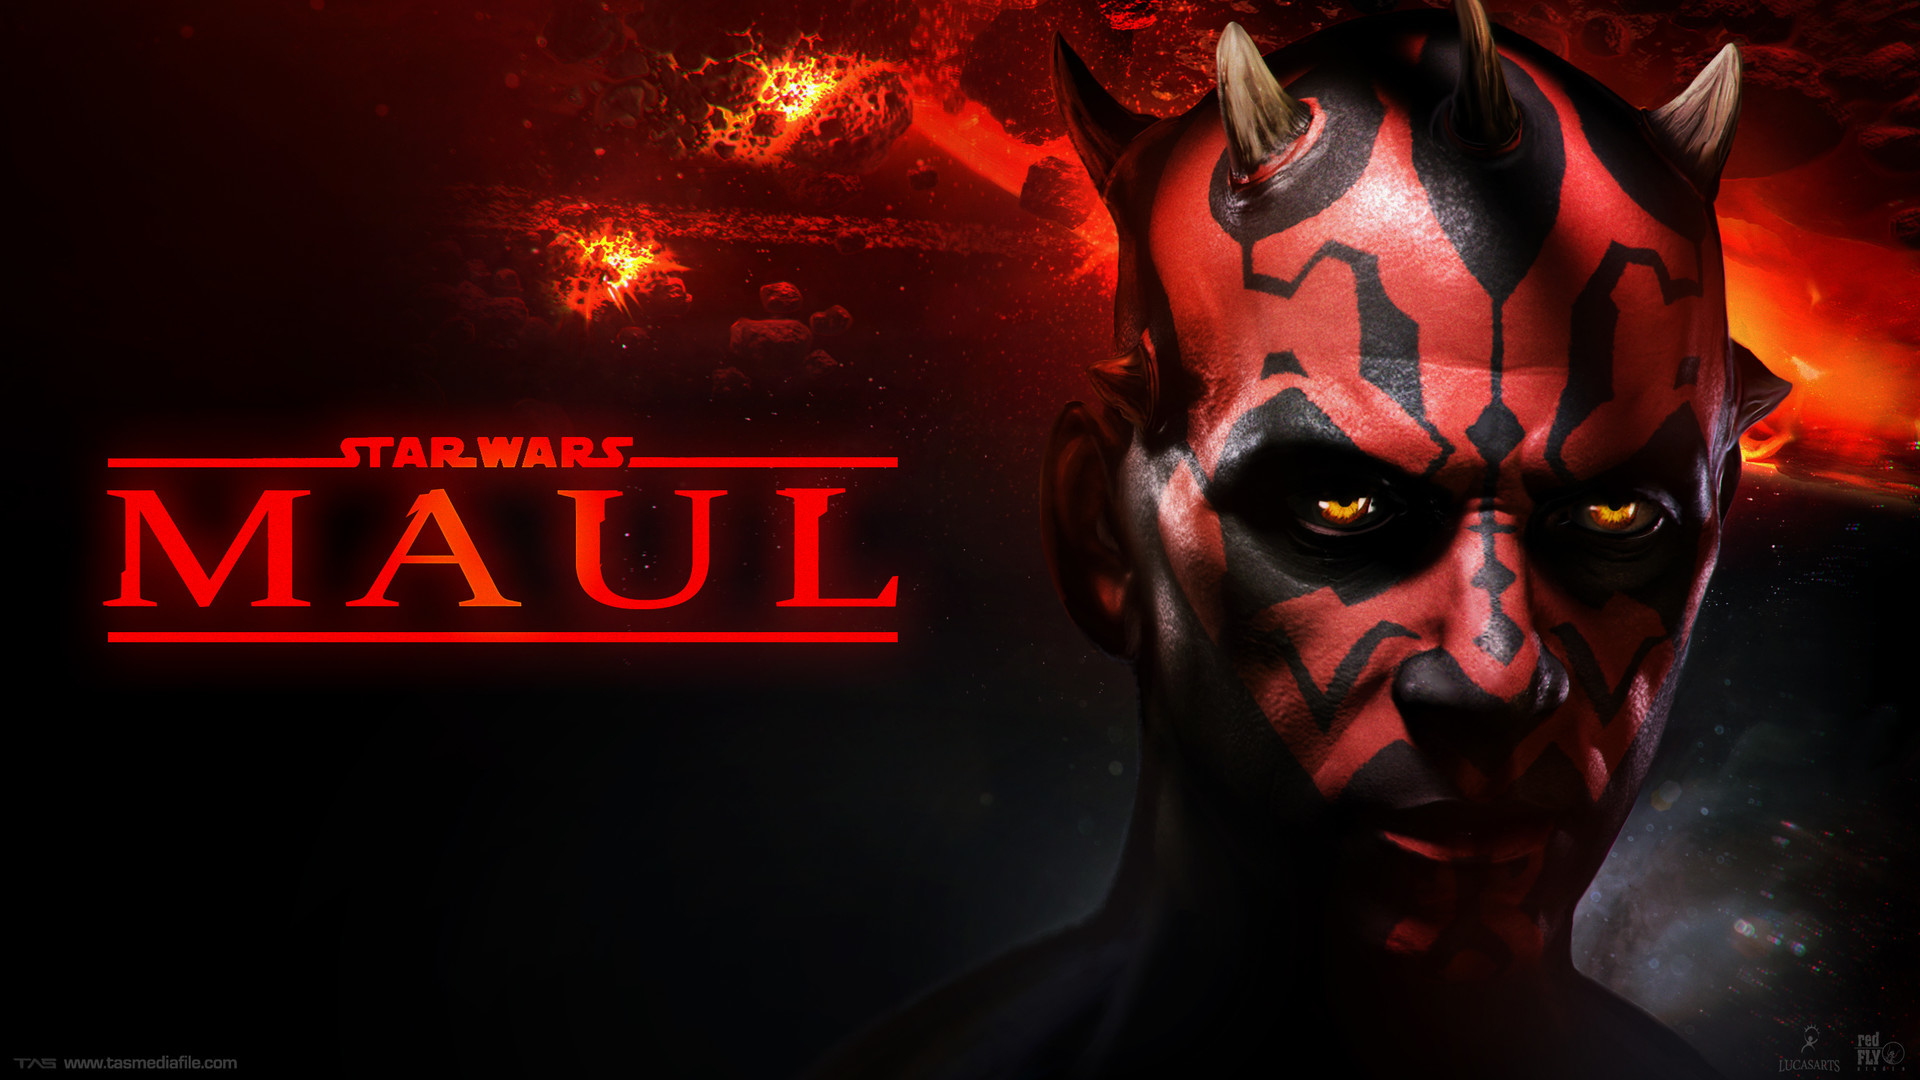 The game, titled Star Wars Maul, was in development between 2010 and 2011, but the plug was pulled by LucasArts prior to Lucasfilms sale to Disney